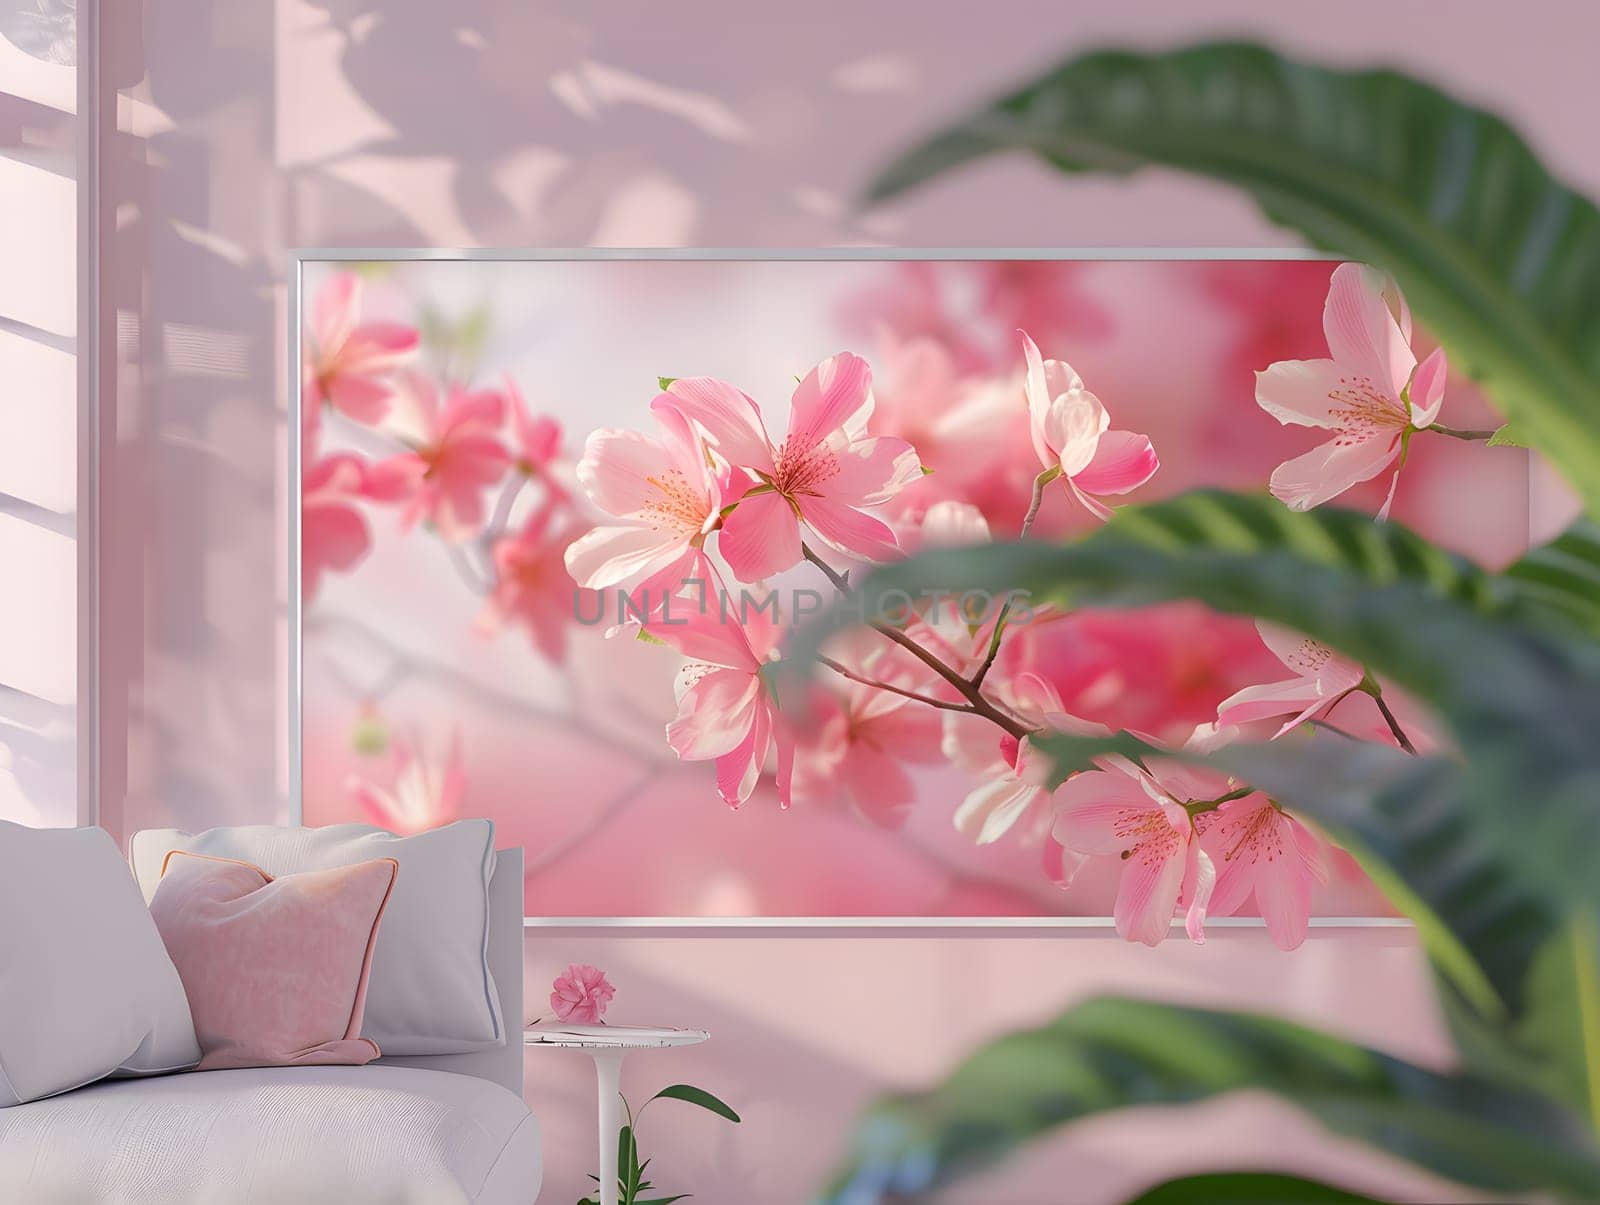 A creative arts setting with a magenta blossom picture on the wall, complementing the pink petal couch. Tints and shades of pink create a cozy atmosphere in the room